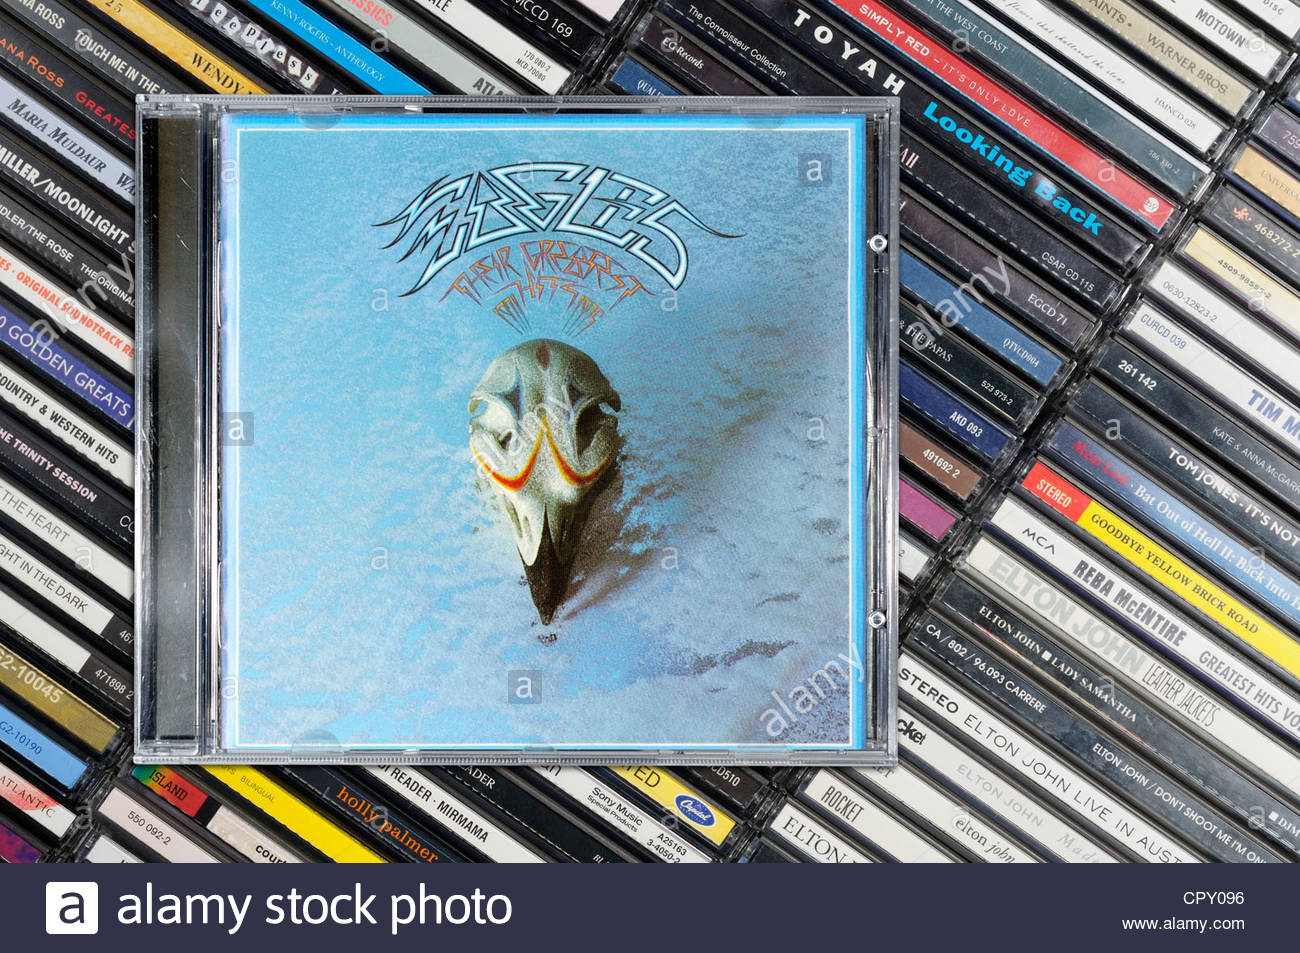 The Eagles Album Cover High Resolution Stock Photography And Images Alamy